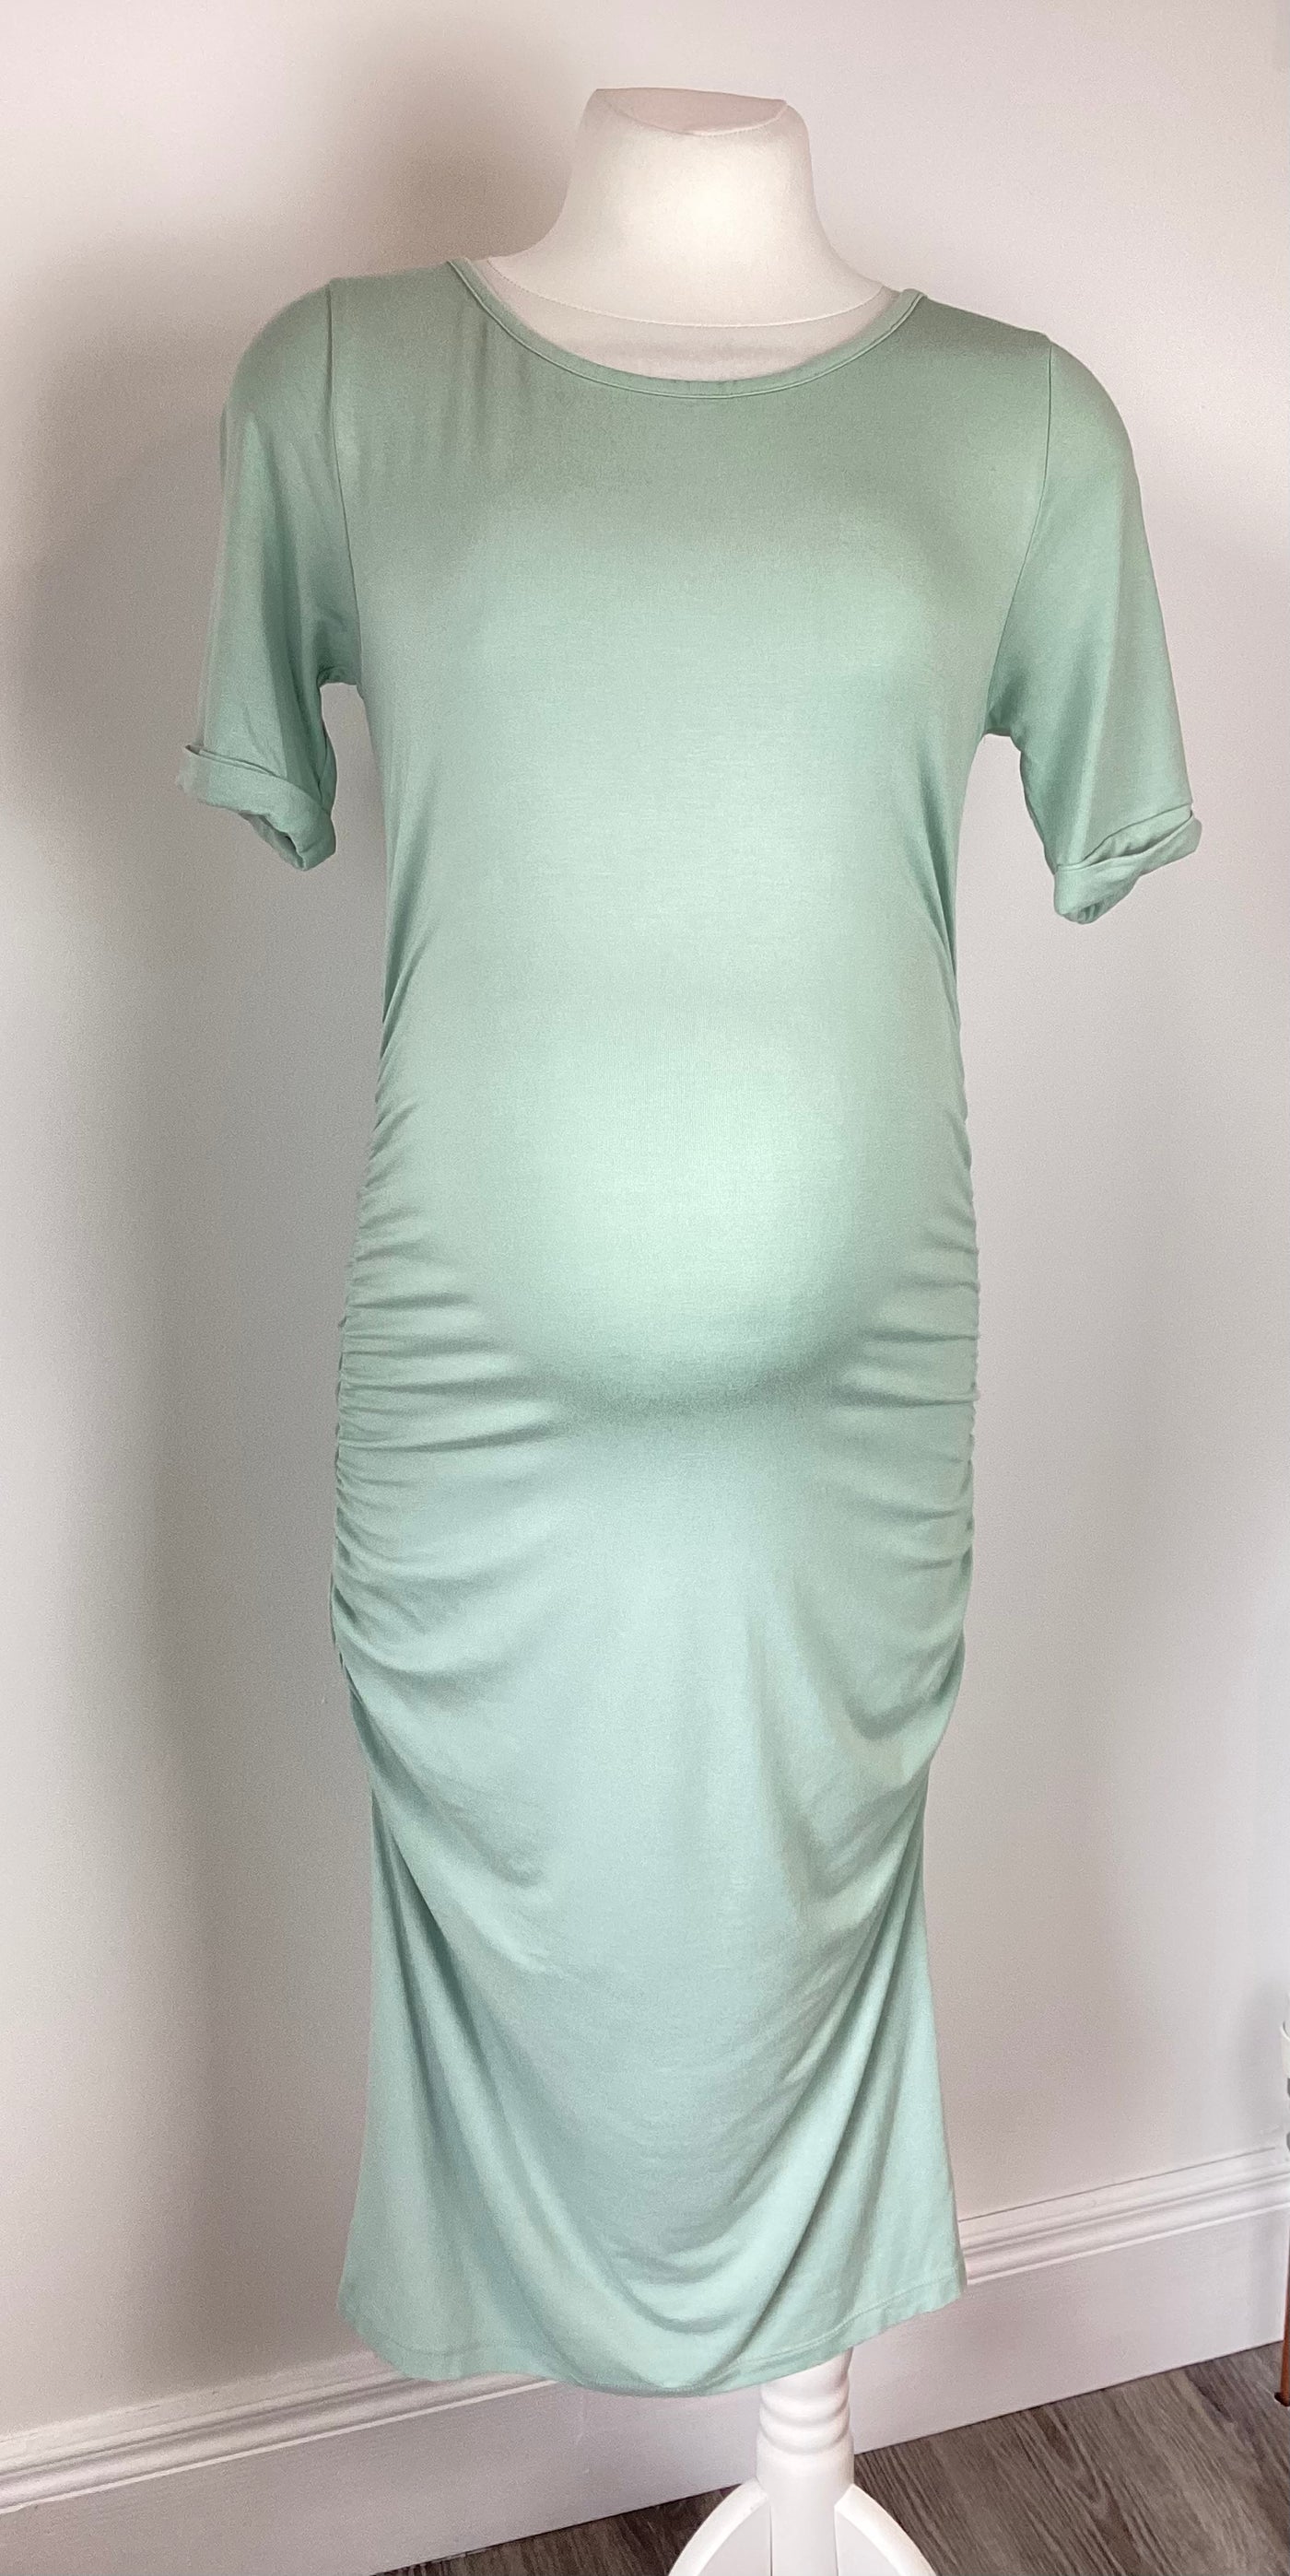 Isabella Oliver mint green stretch dress - Size 3 (Approx UK 12)